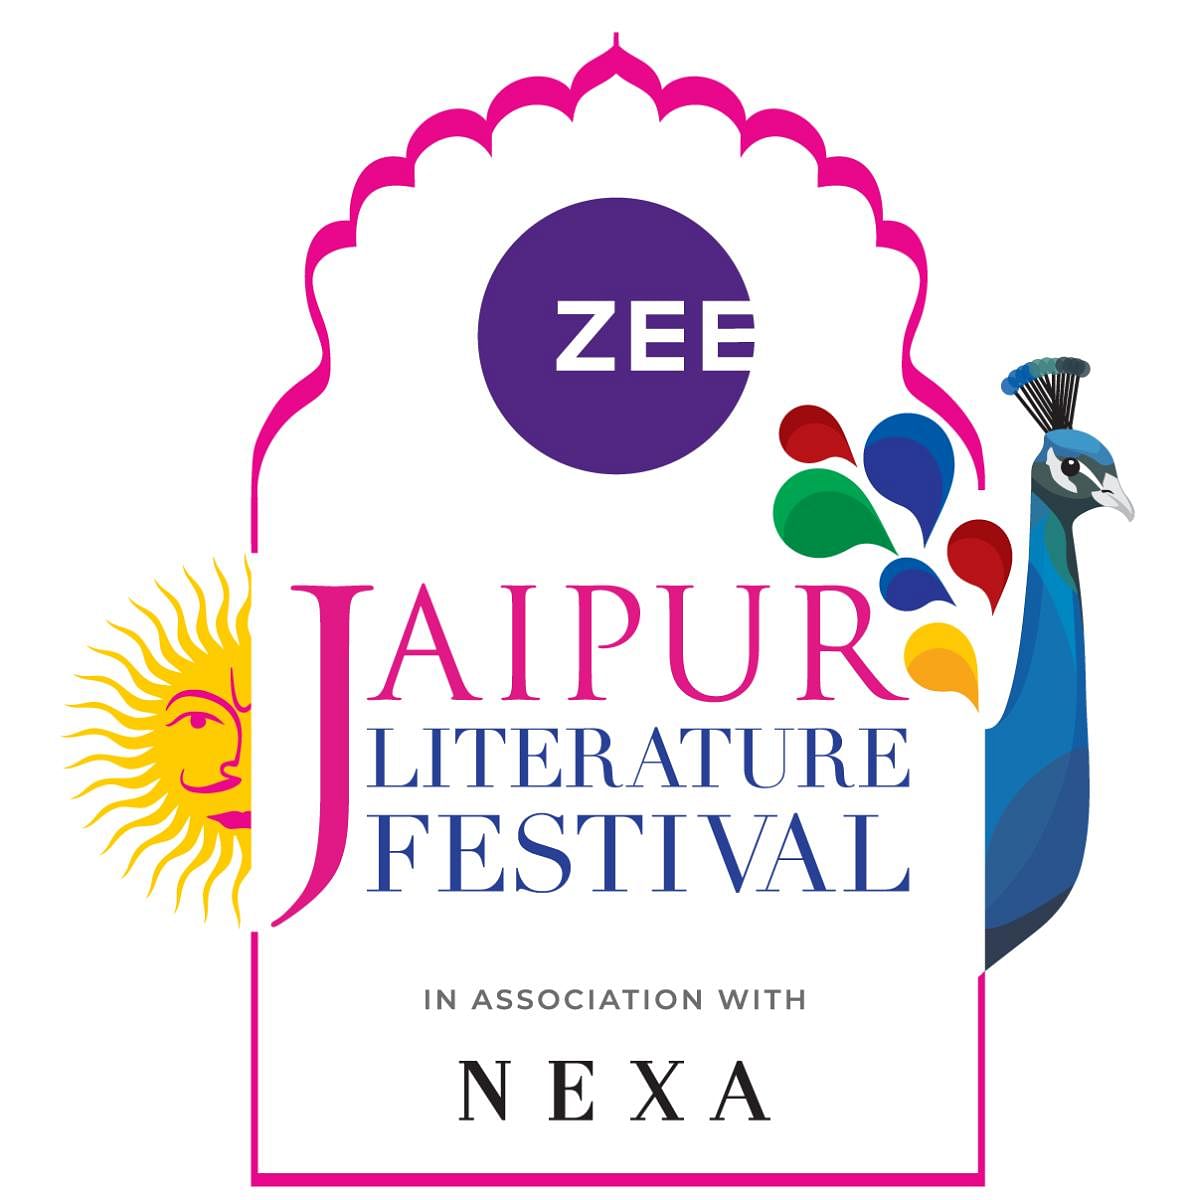 The celebrated Jaipur Literature Festival (JLF) is all set to make its debut in the Northern Ireland capital of Belfast on June 21.